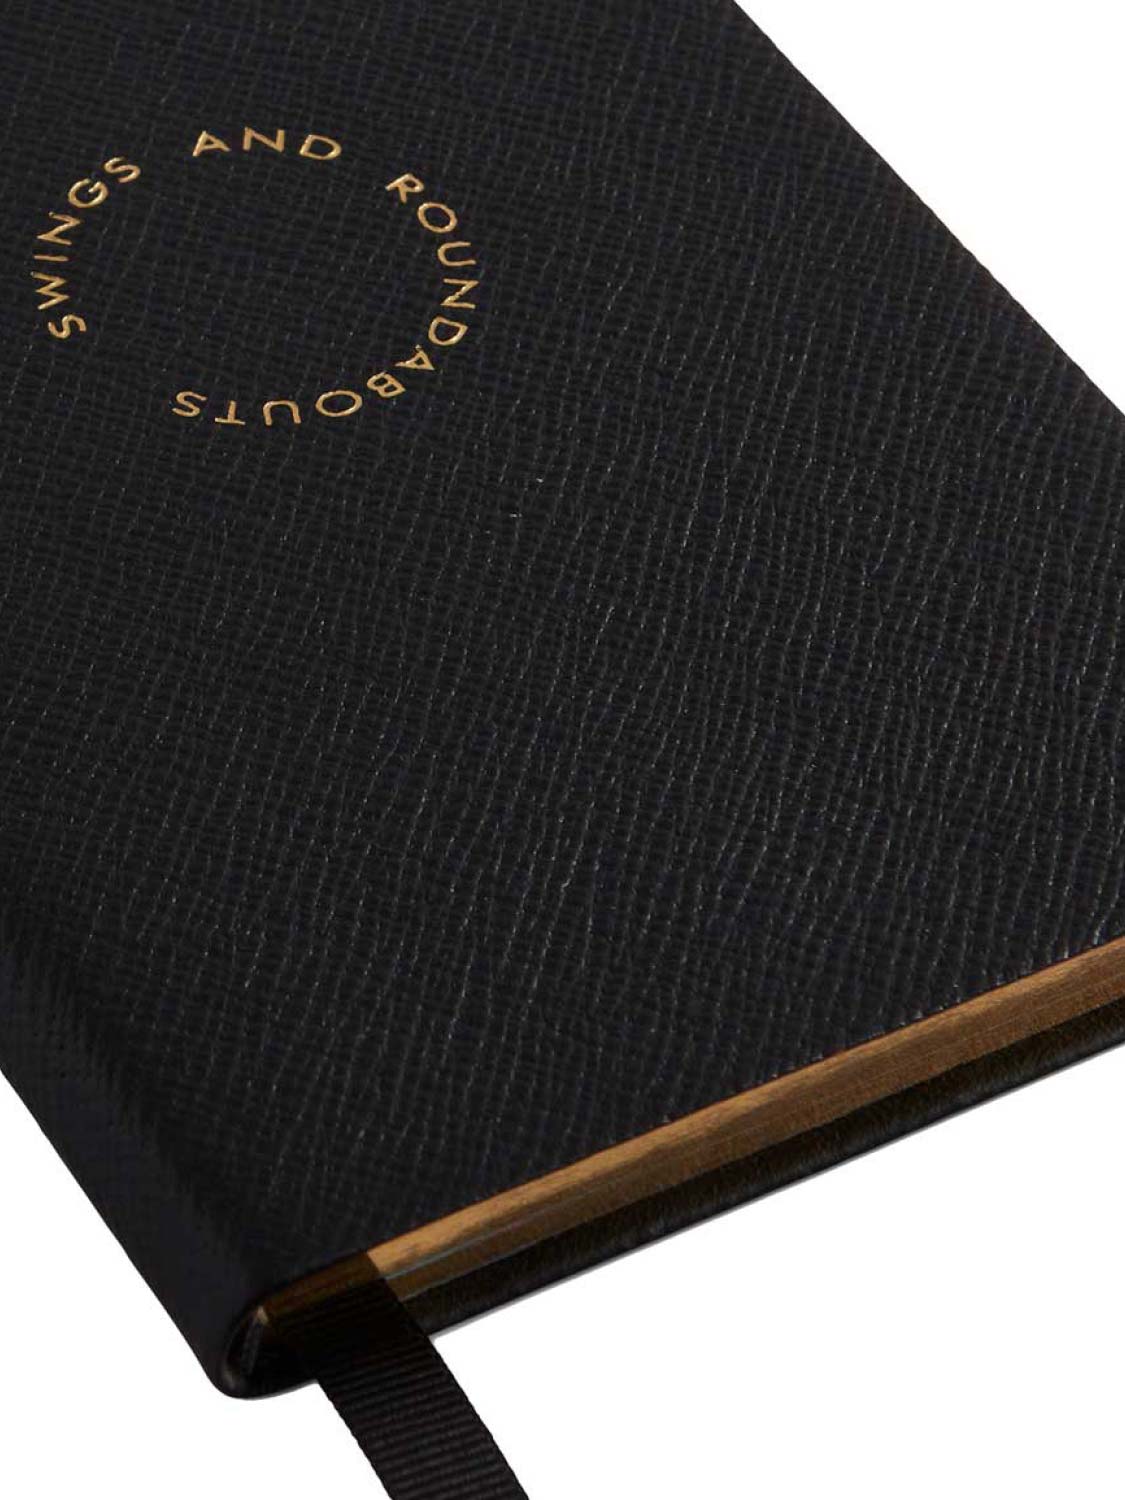 Smythson Swings and Roundabouts Chelsea Notebook